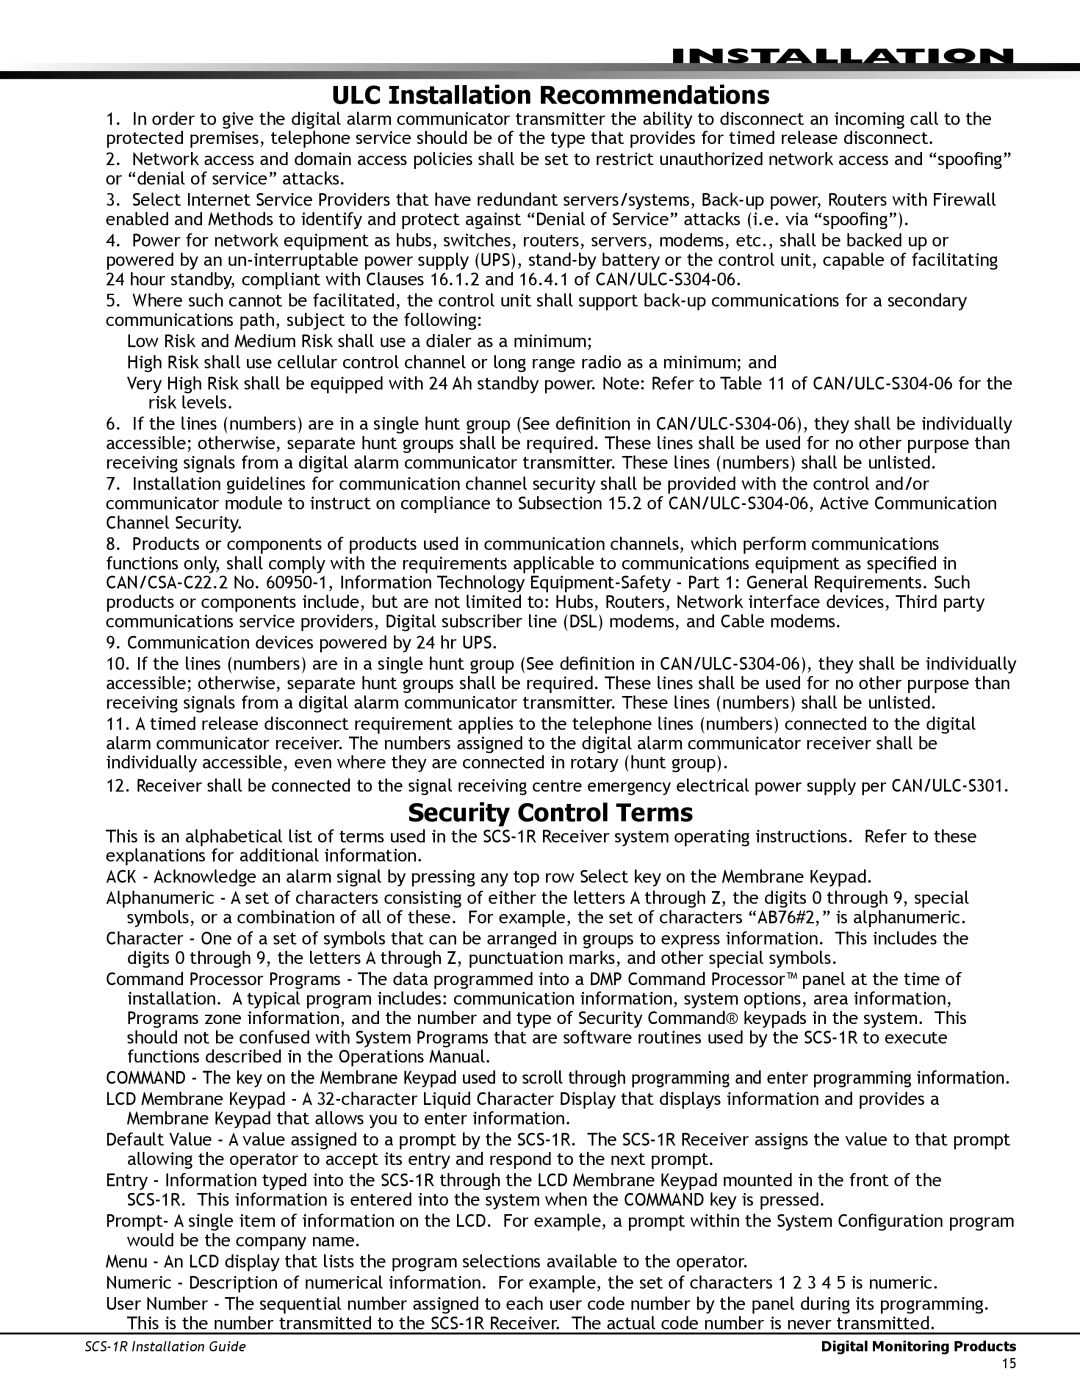 DMP Electronics SCS-1R manual ULC Installation Recommendations, Security Control Terms 